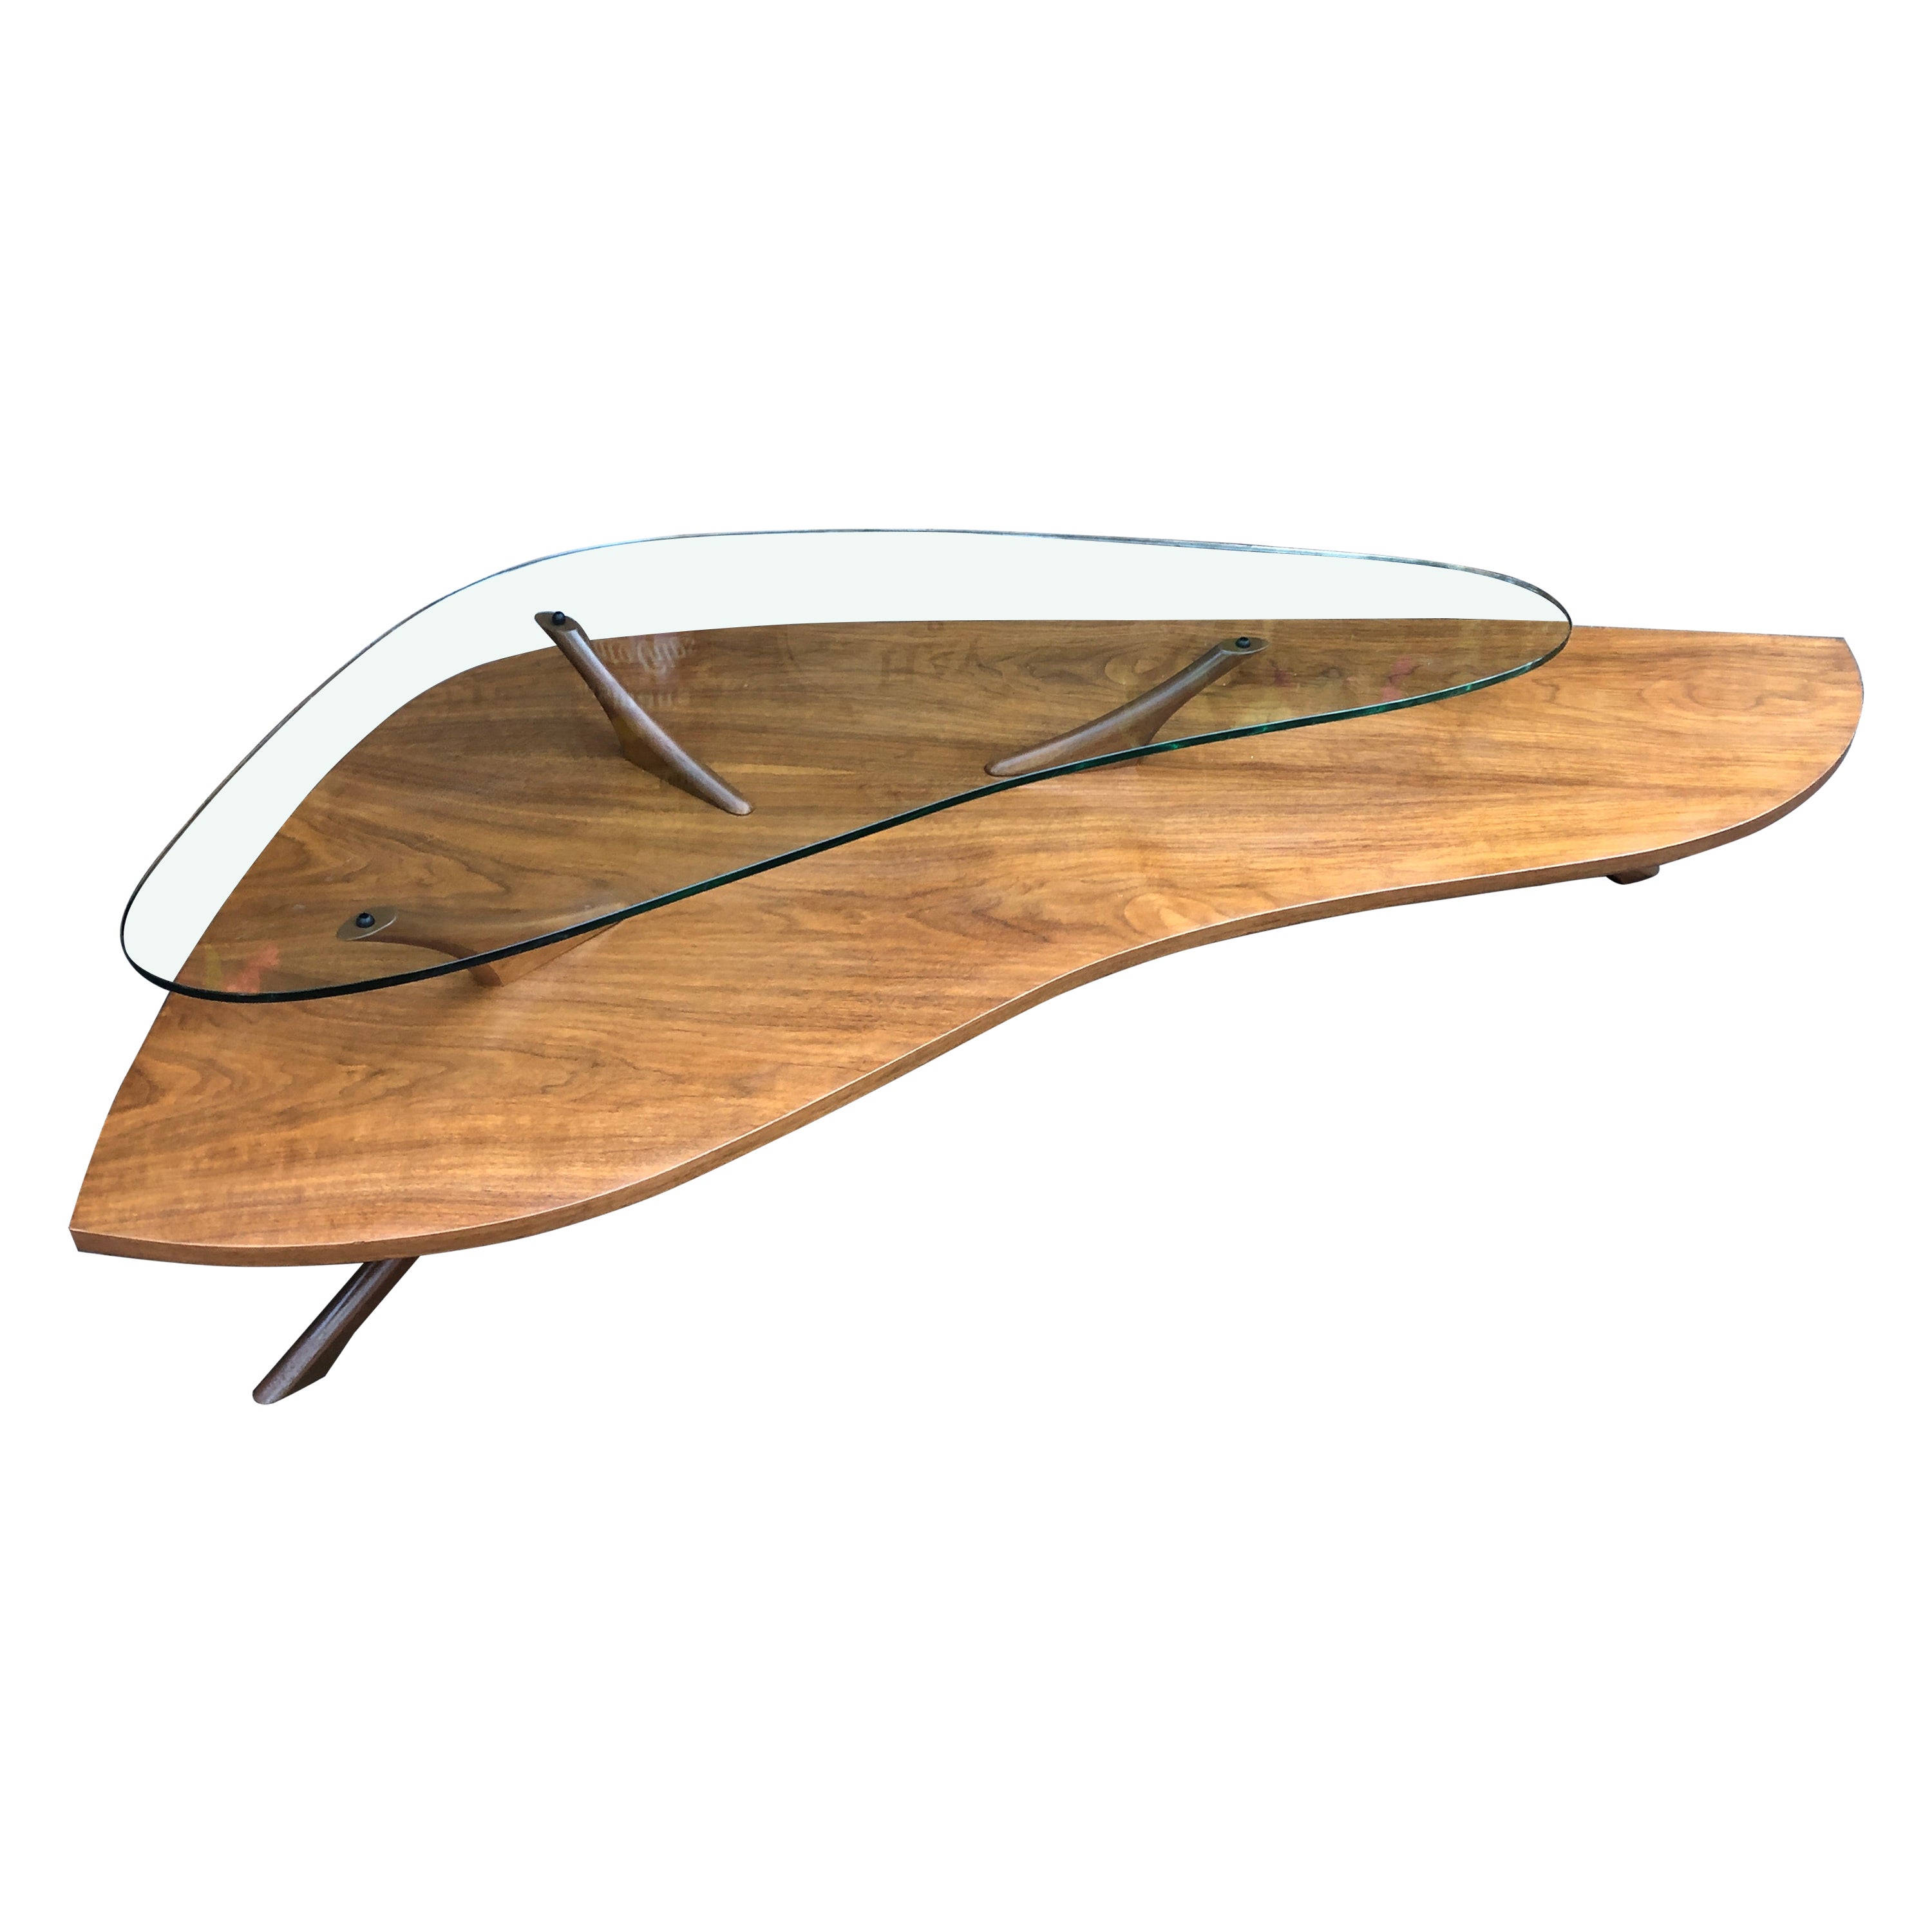 Scrumptious Pearsall style Sculptural Walnut 2 Tier Coffee Table Kidney Shaped For Sale